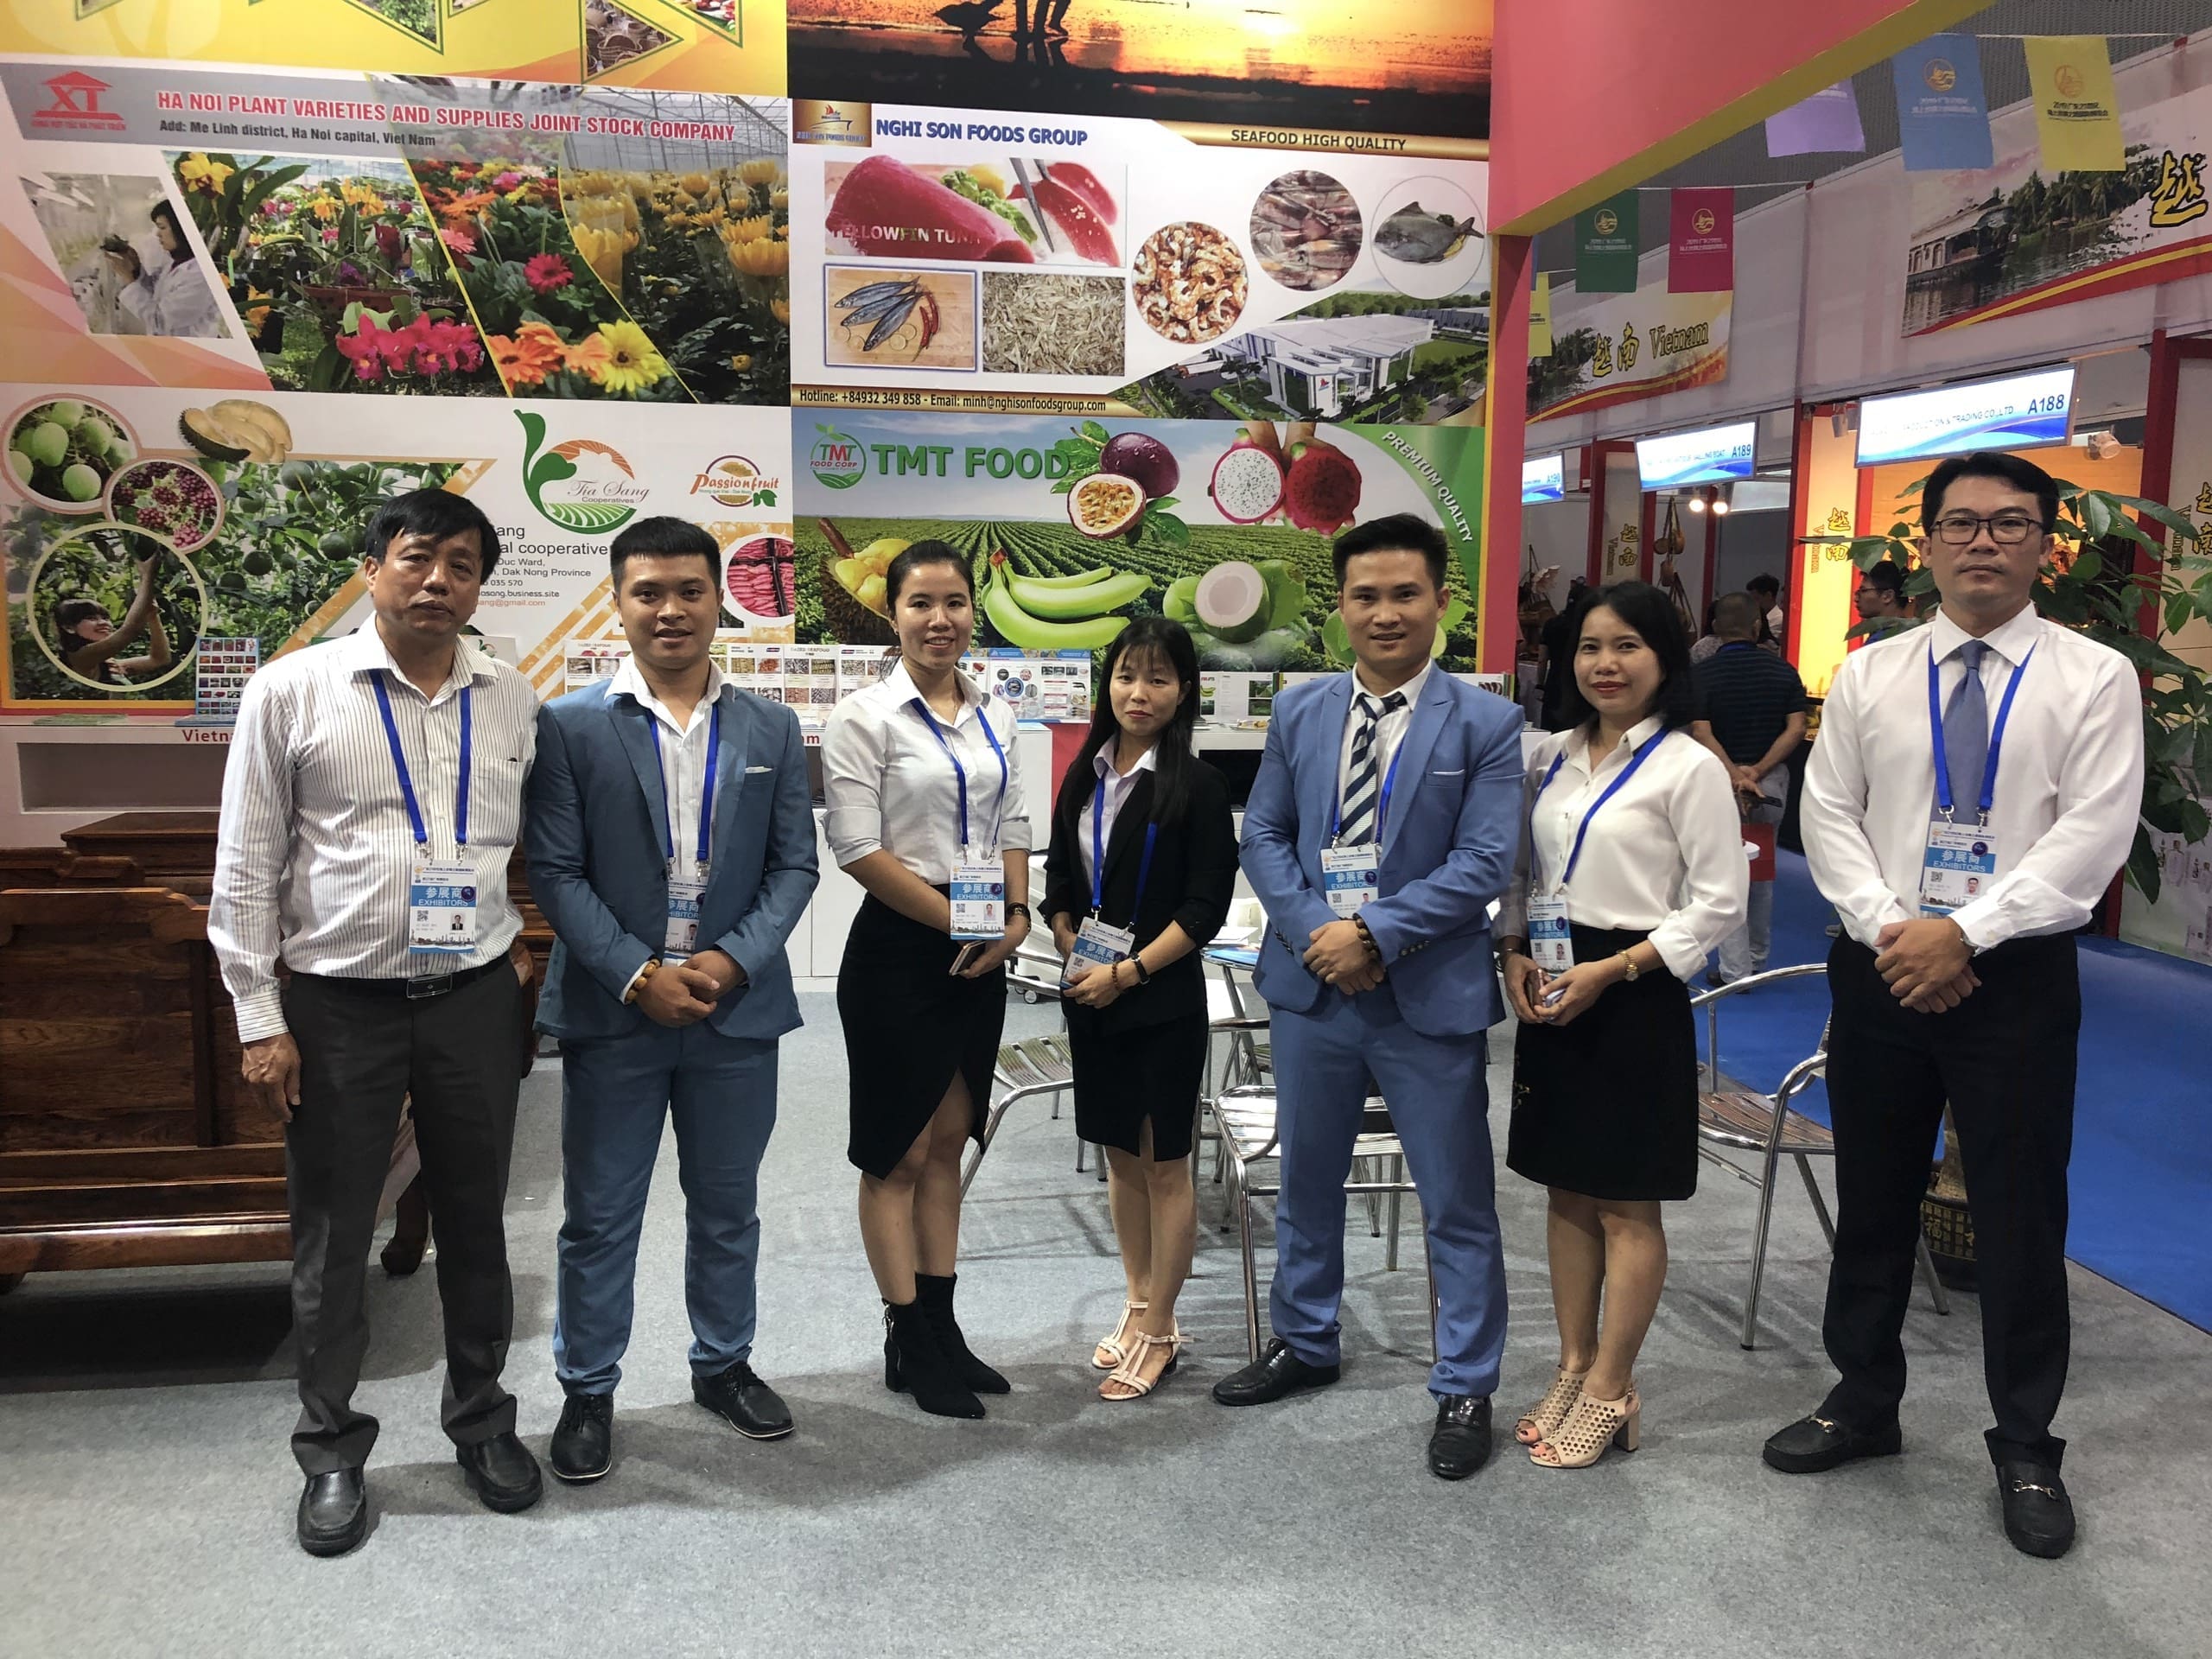 nghi son foods group